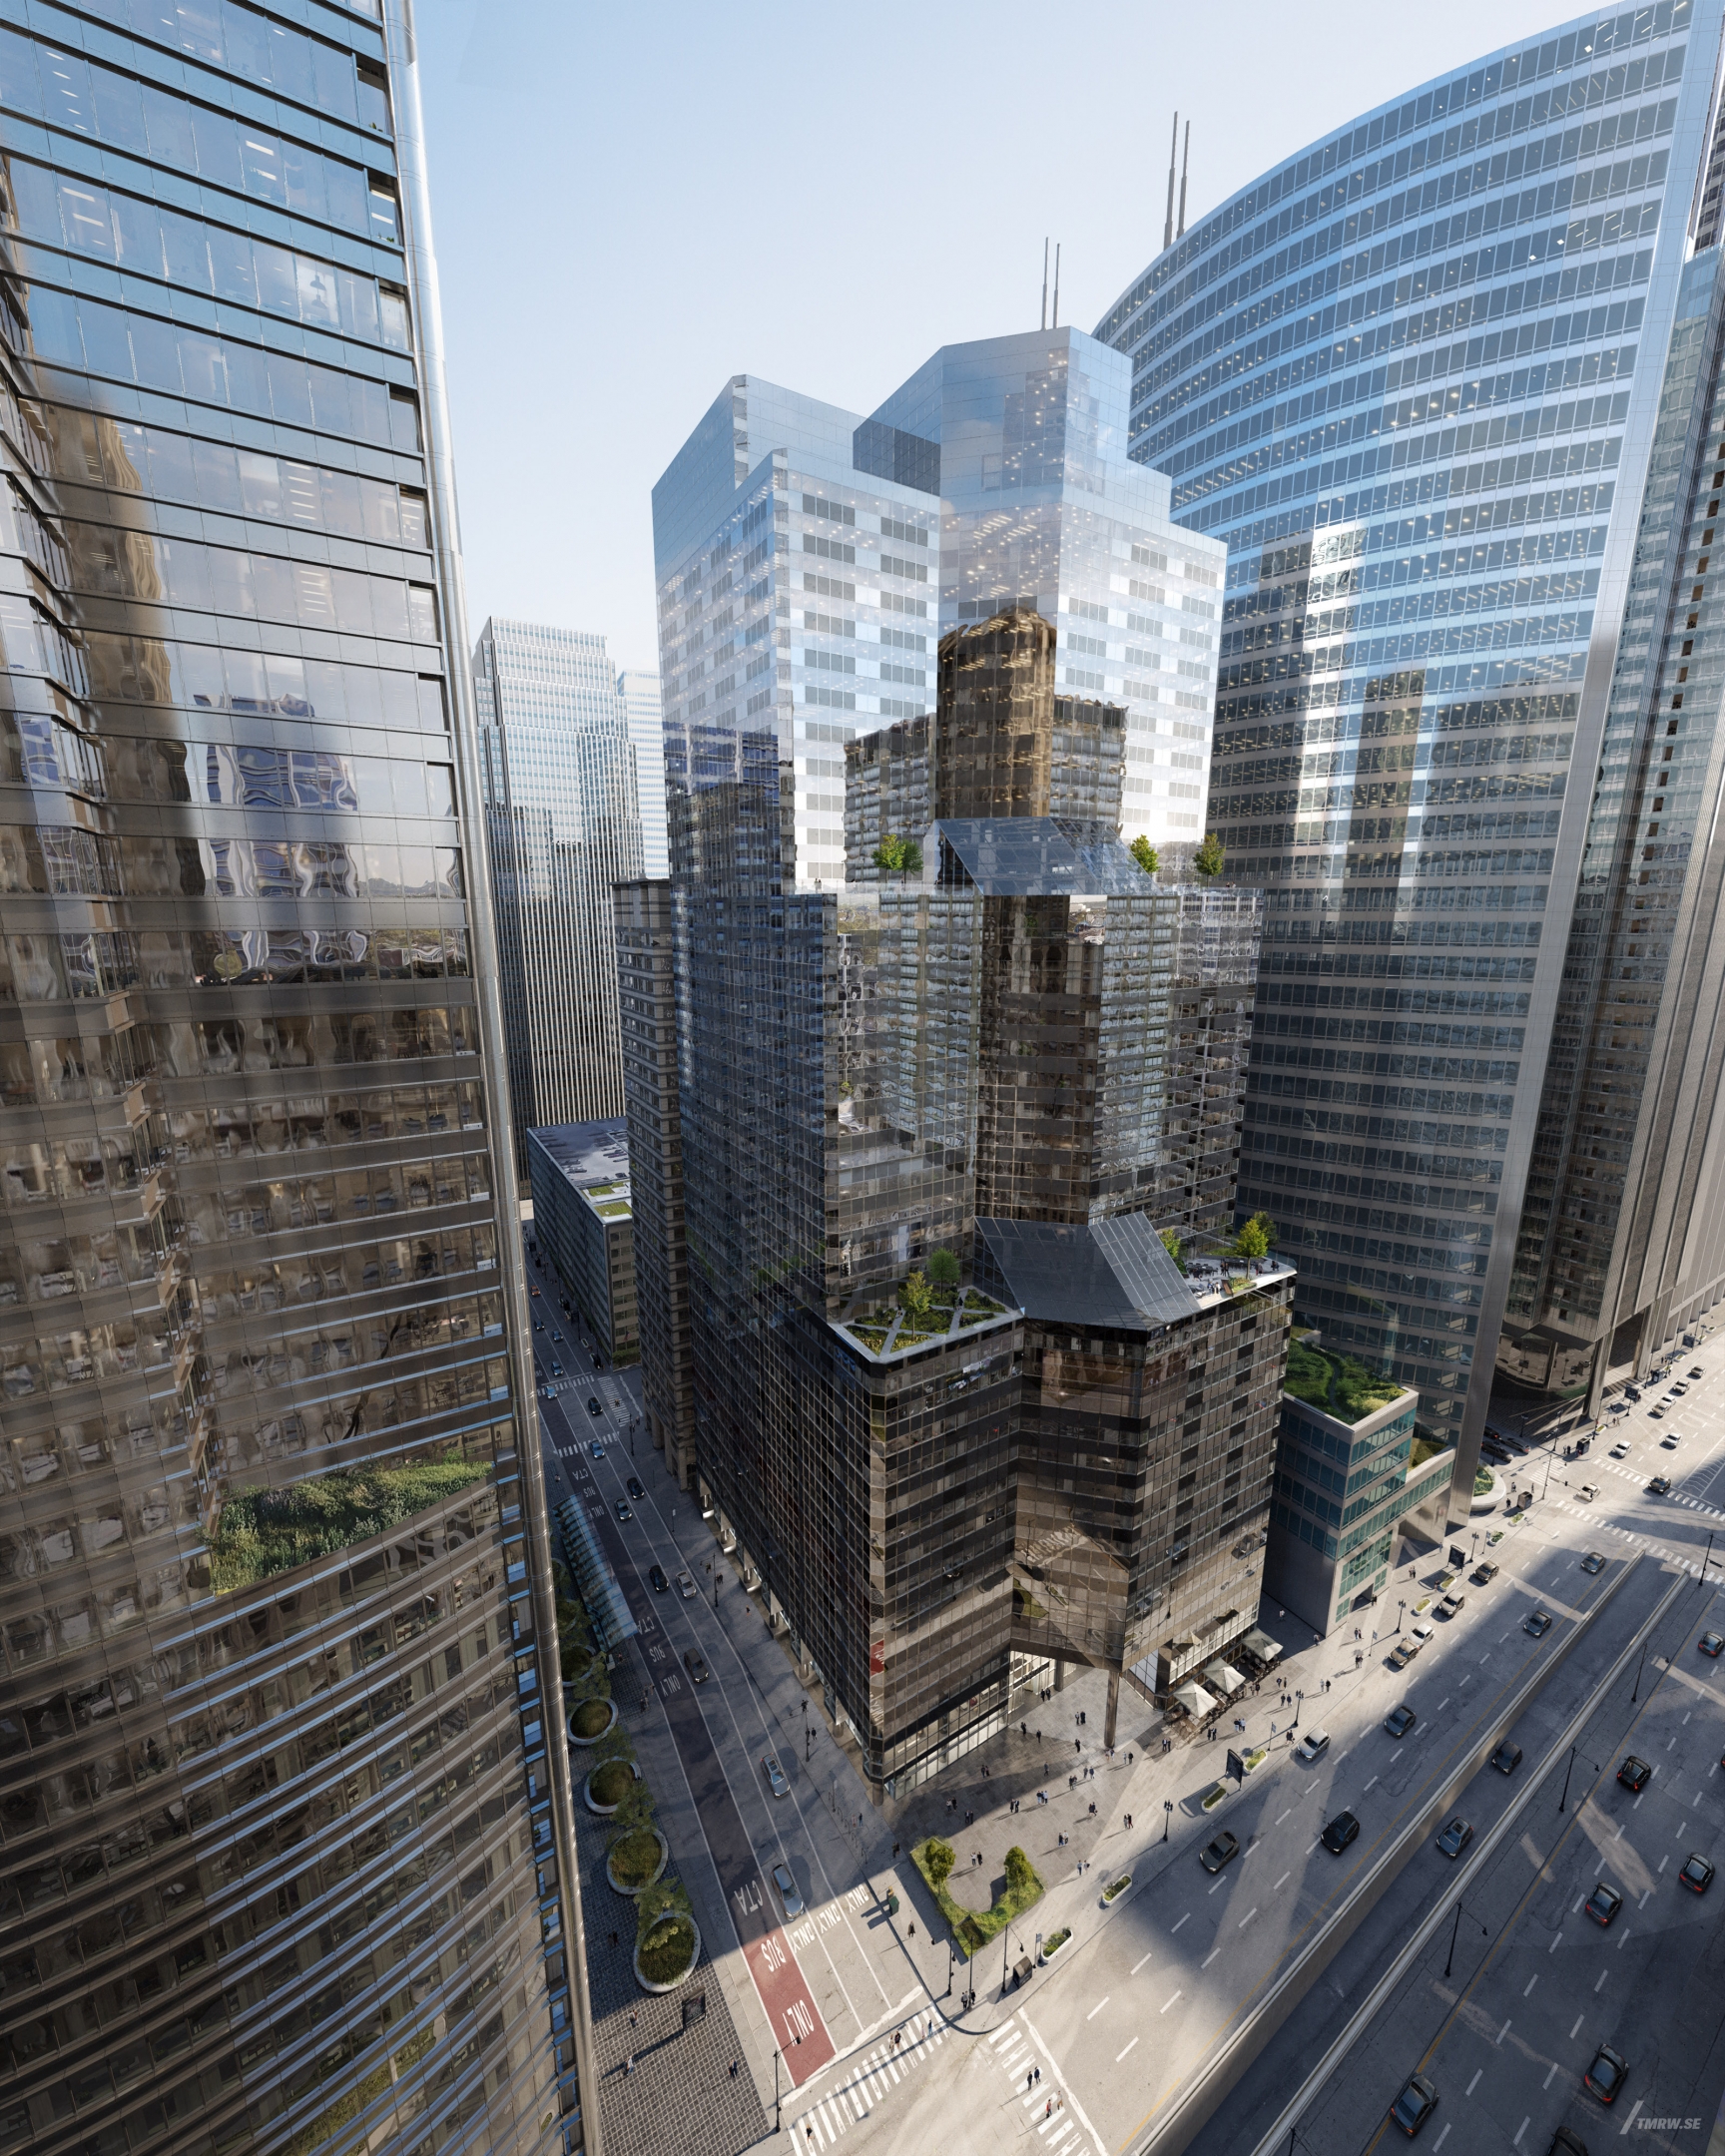 Architectural visualization of One South Wecker for Gensler. A image of an office skyscrape building with glass-faced in daylight from a aerial view.